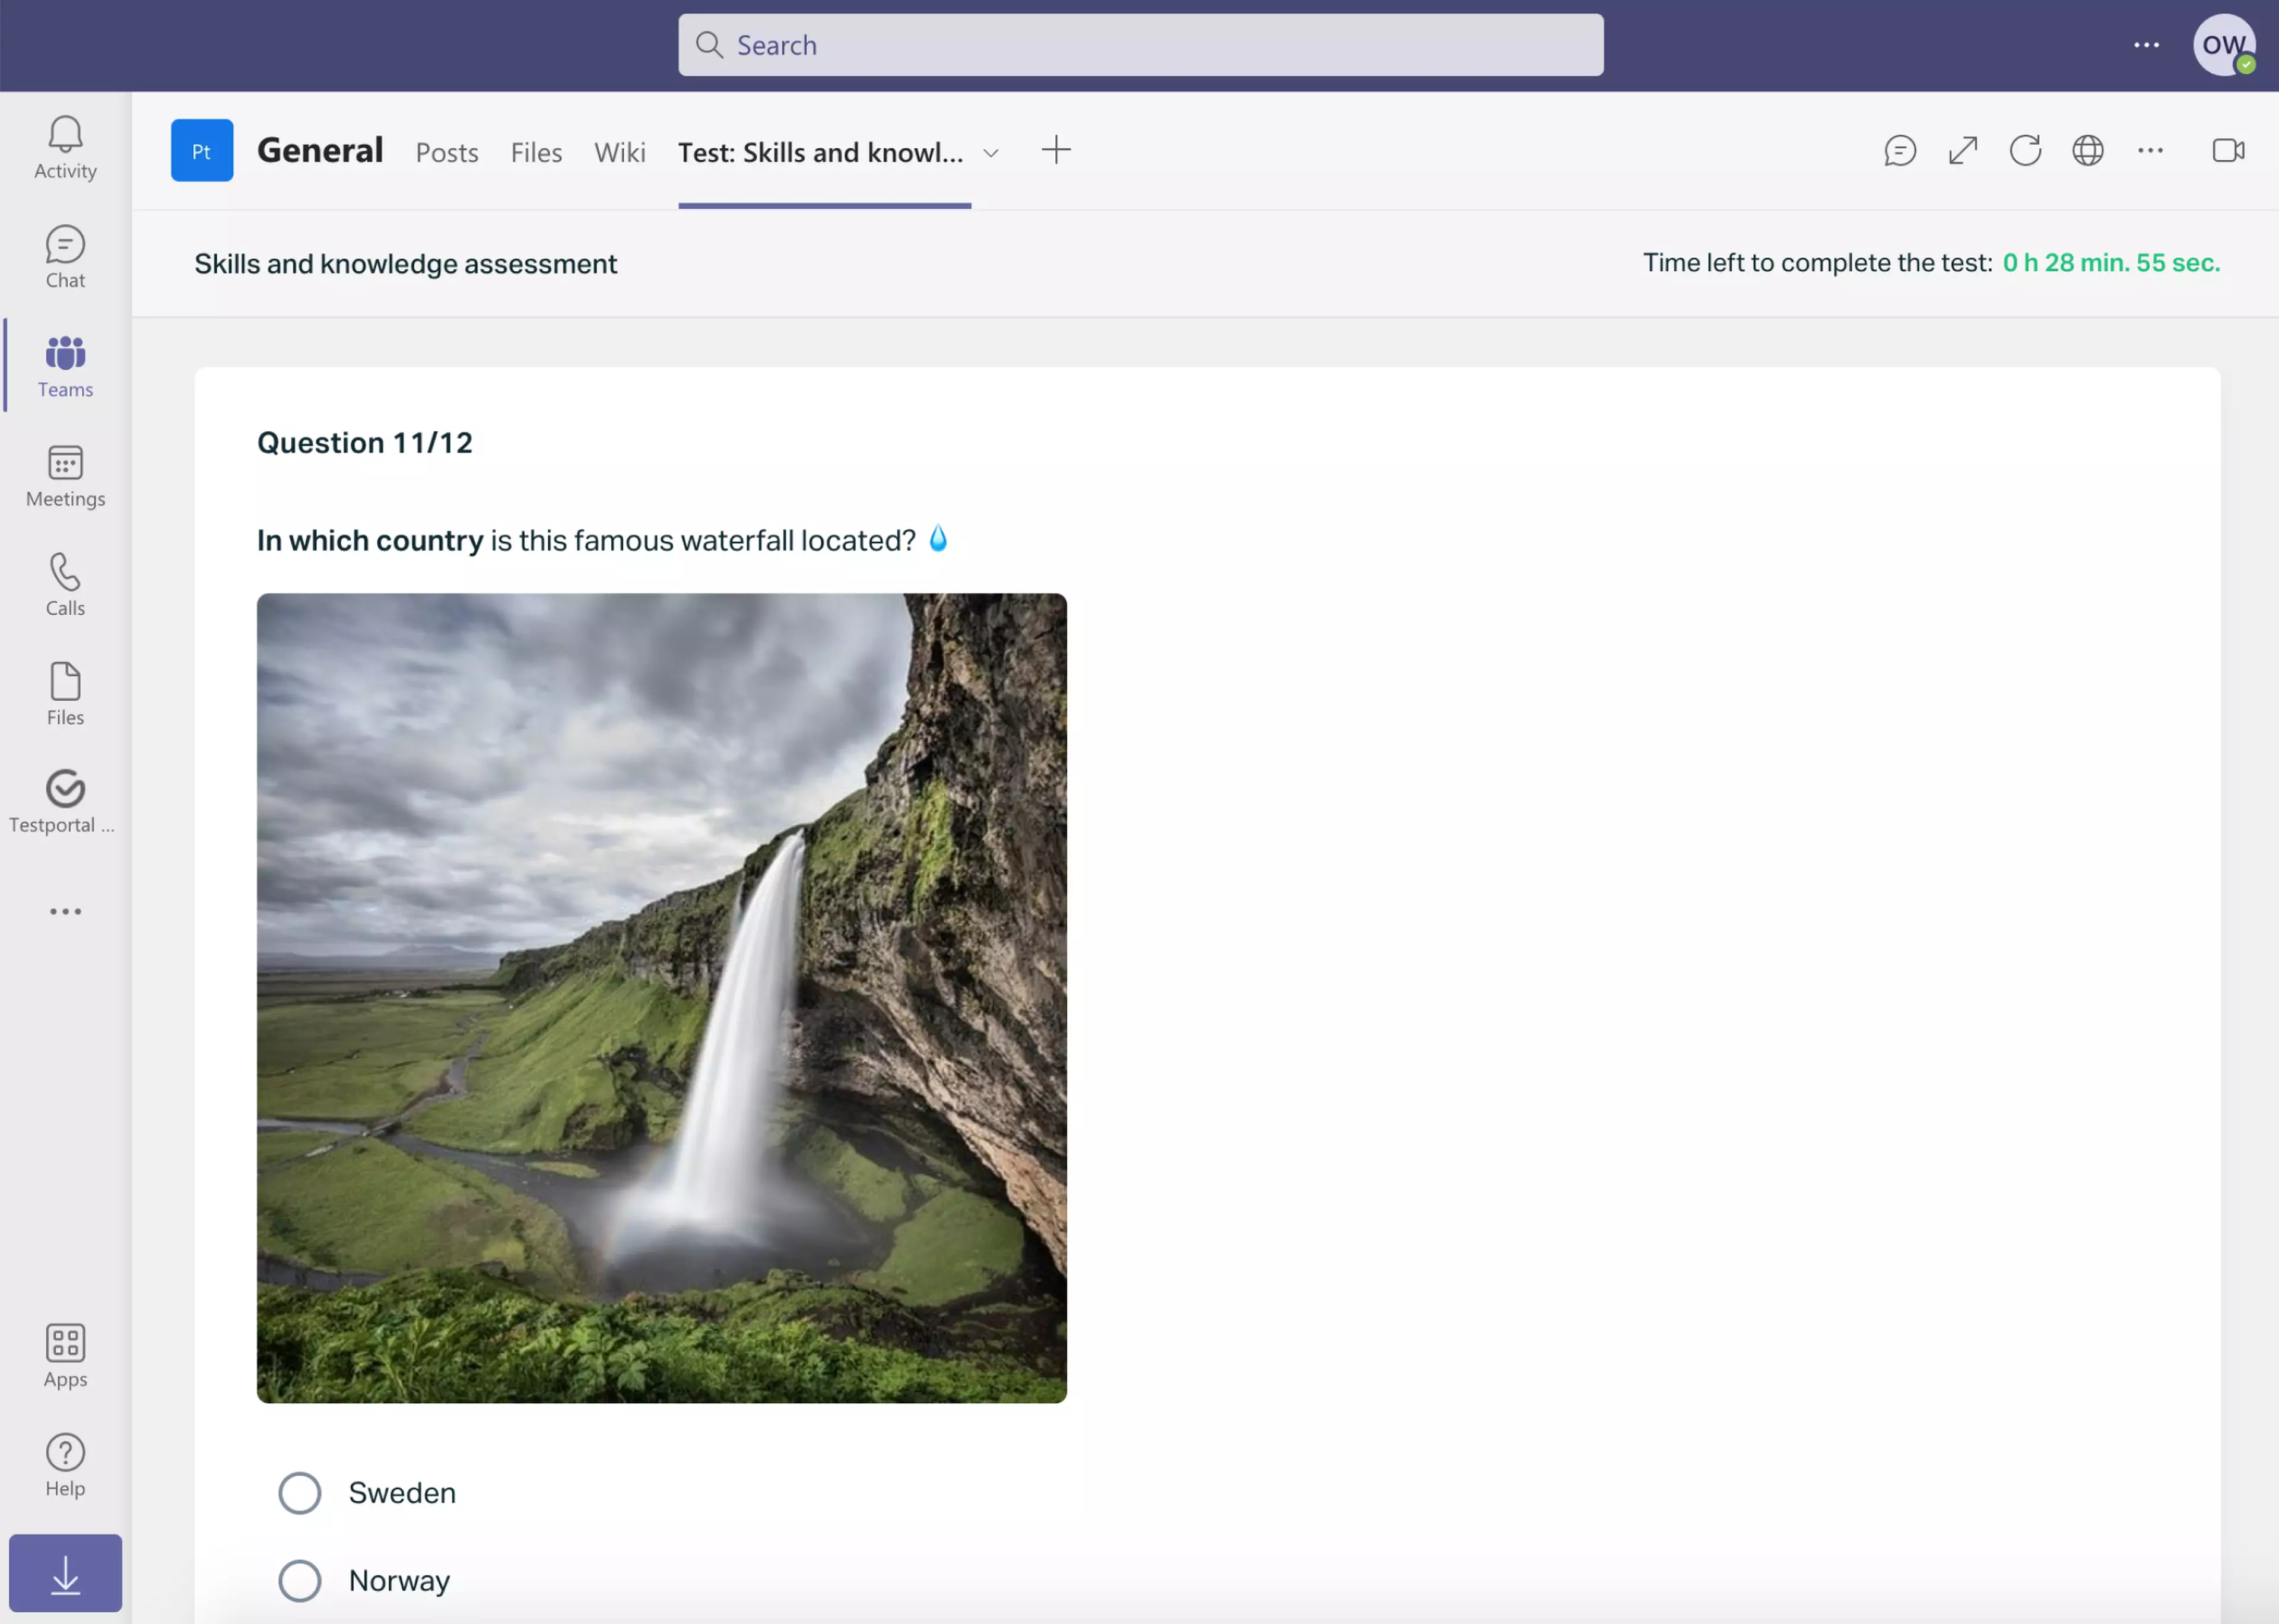   Testportal for Microsoft Teams online test question with an image of a waterfall.